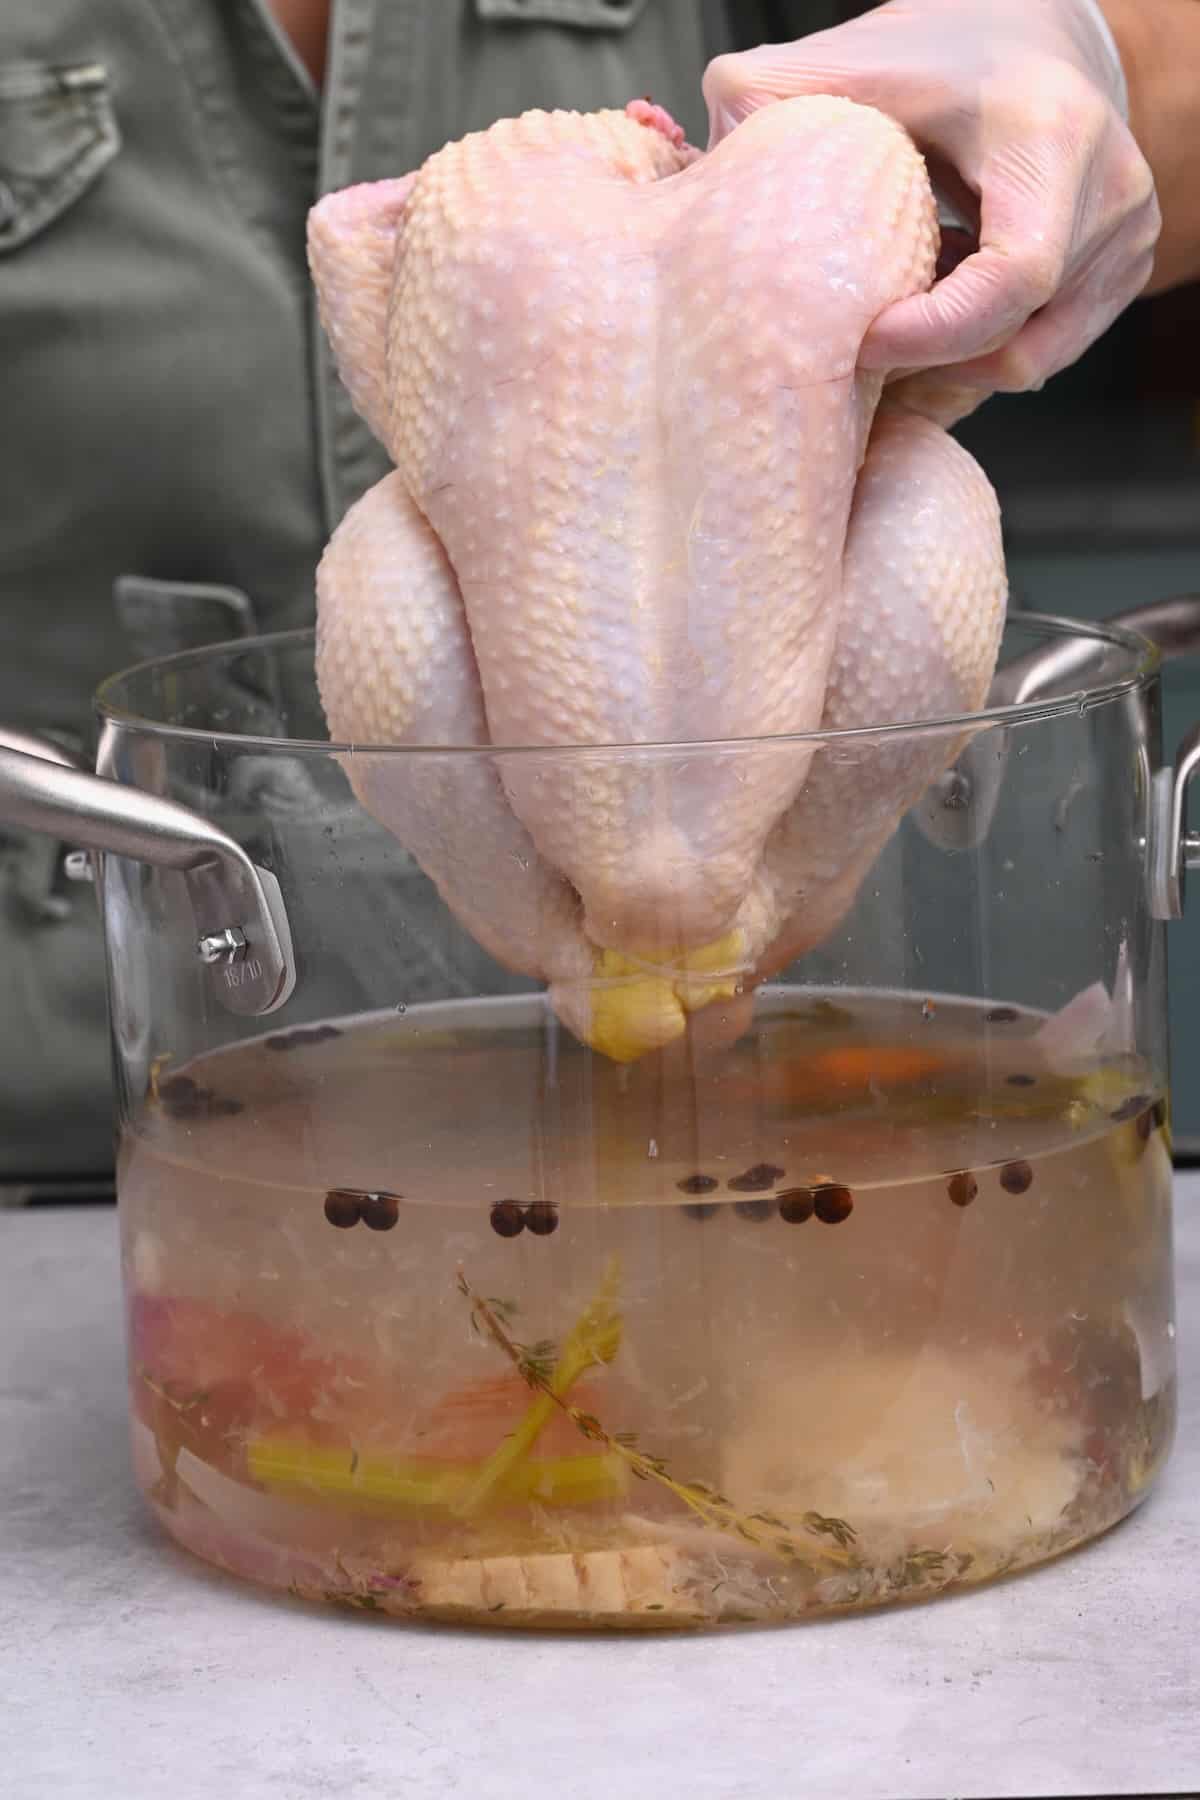 Placing a whole chicken in brine